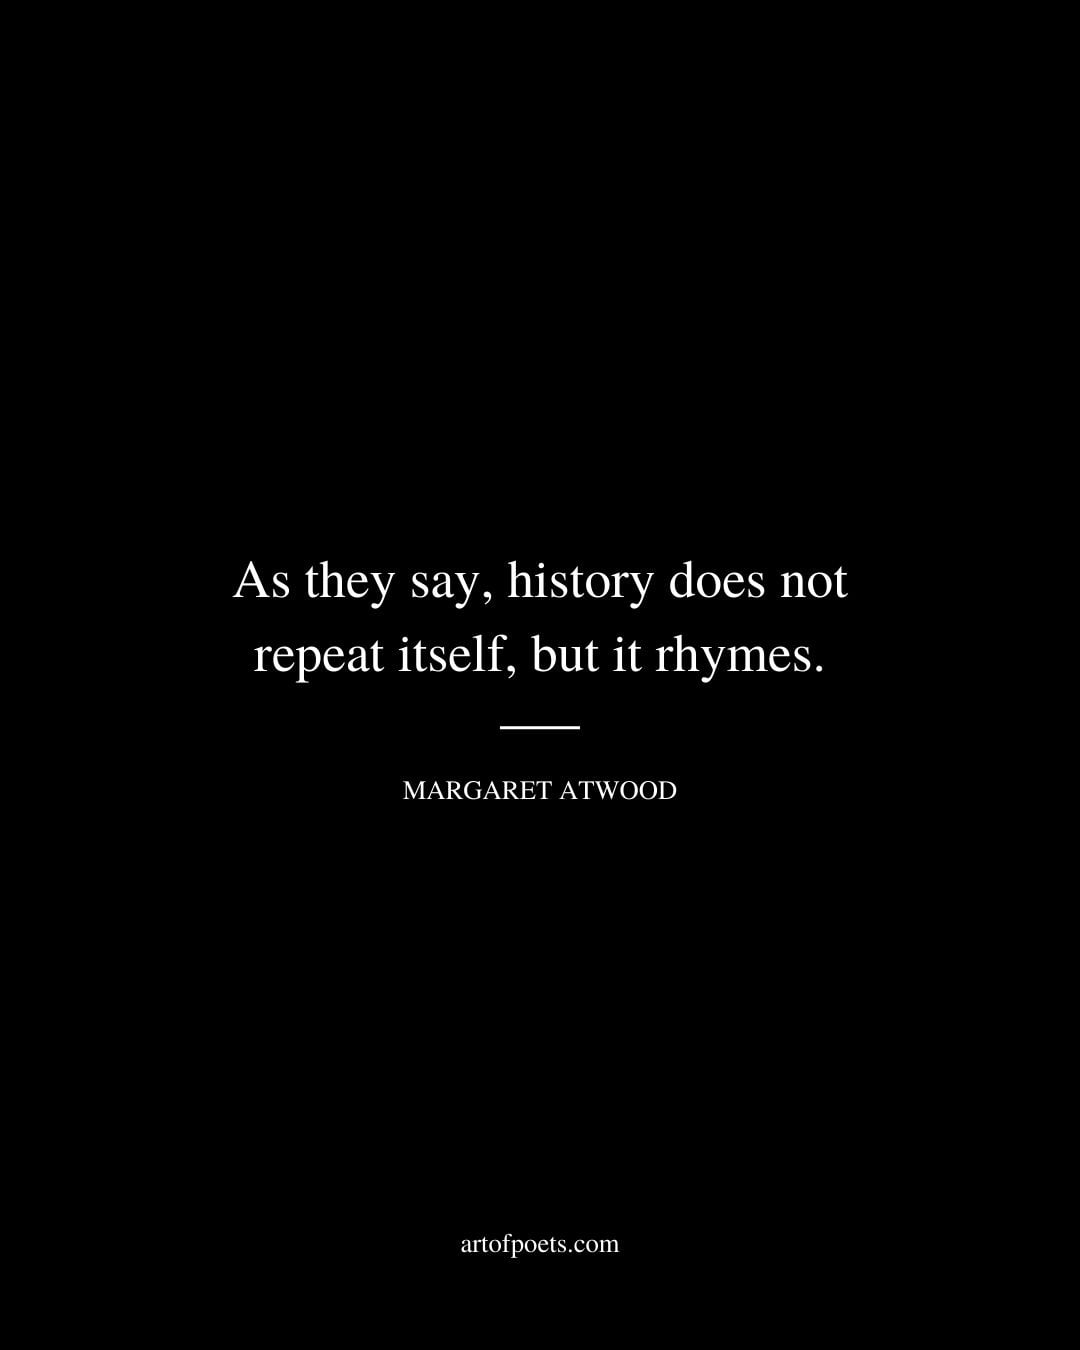 As they say history does not repeat itself but it rhymes. Margaret Atwood